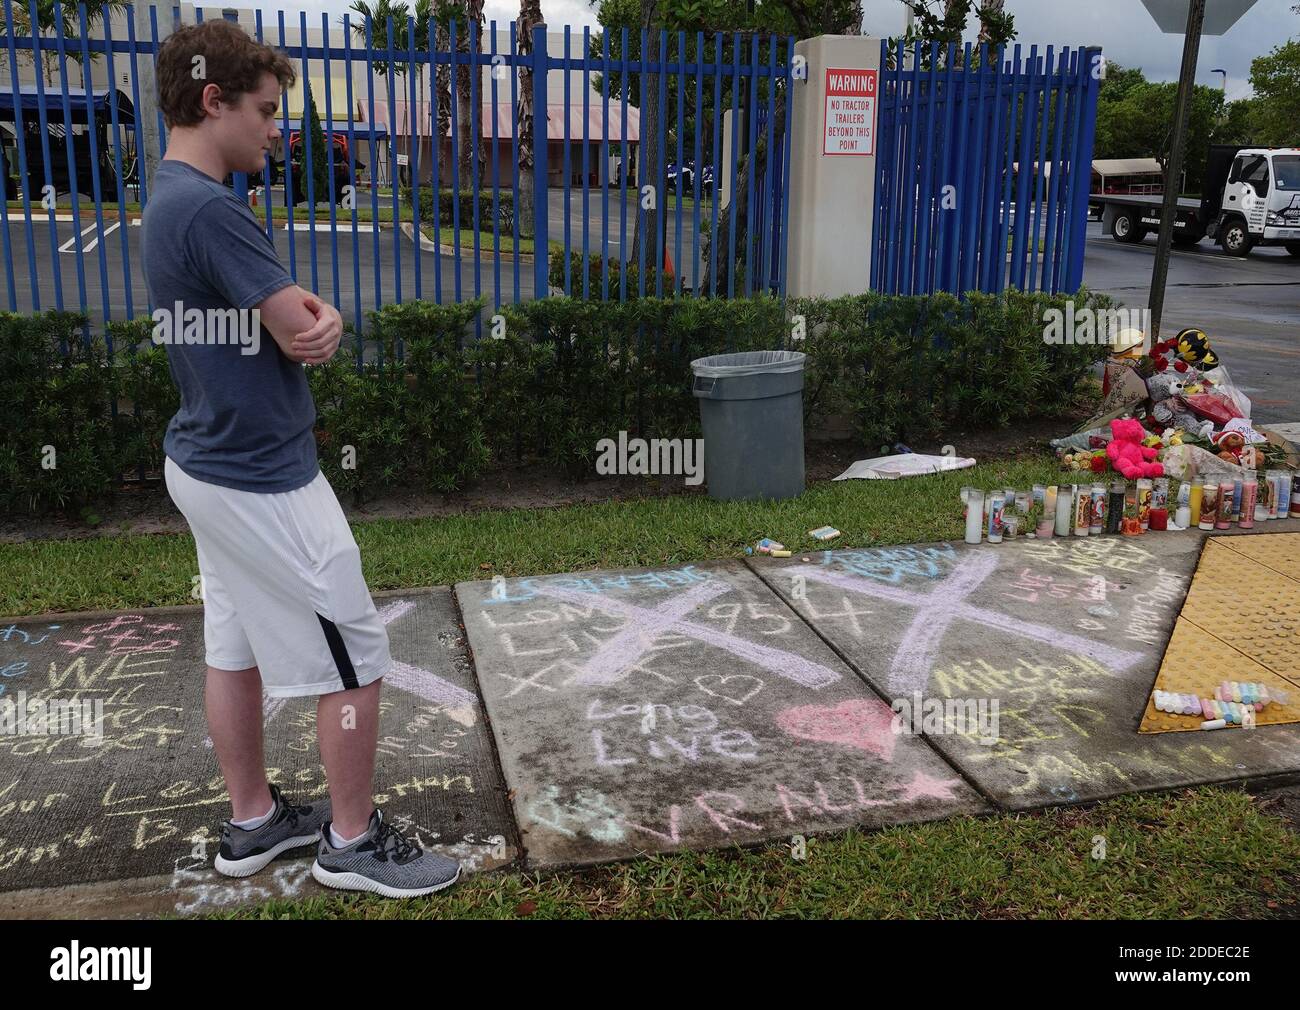 Fans and mourners of Broward-based rapper XXXTentacion, whose given name  was Jahseh Onfroy, visit the shooting scene on Tuesday, June 19, 2018,  outside Riva Motorsports in Pompano Beach where Onfroy was gunned